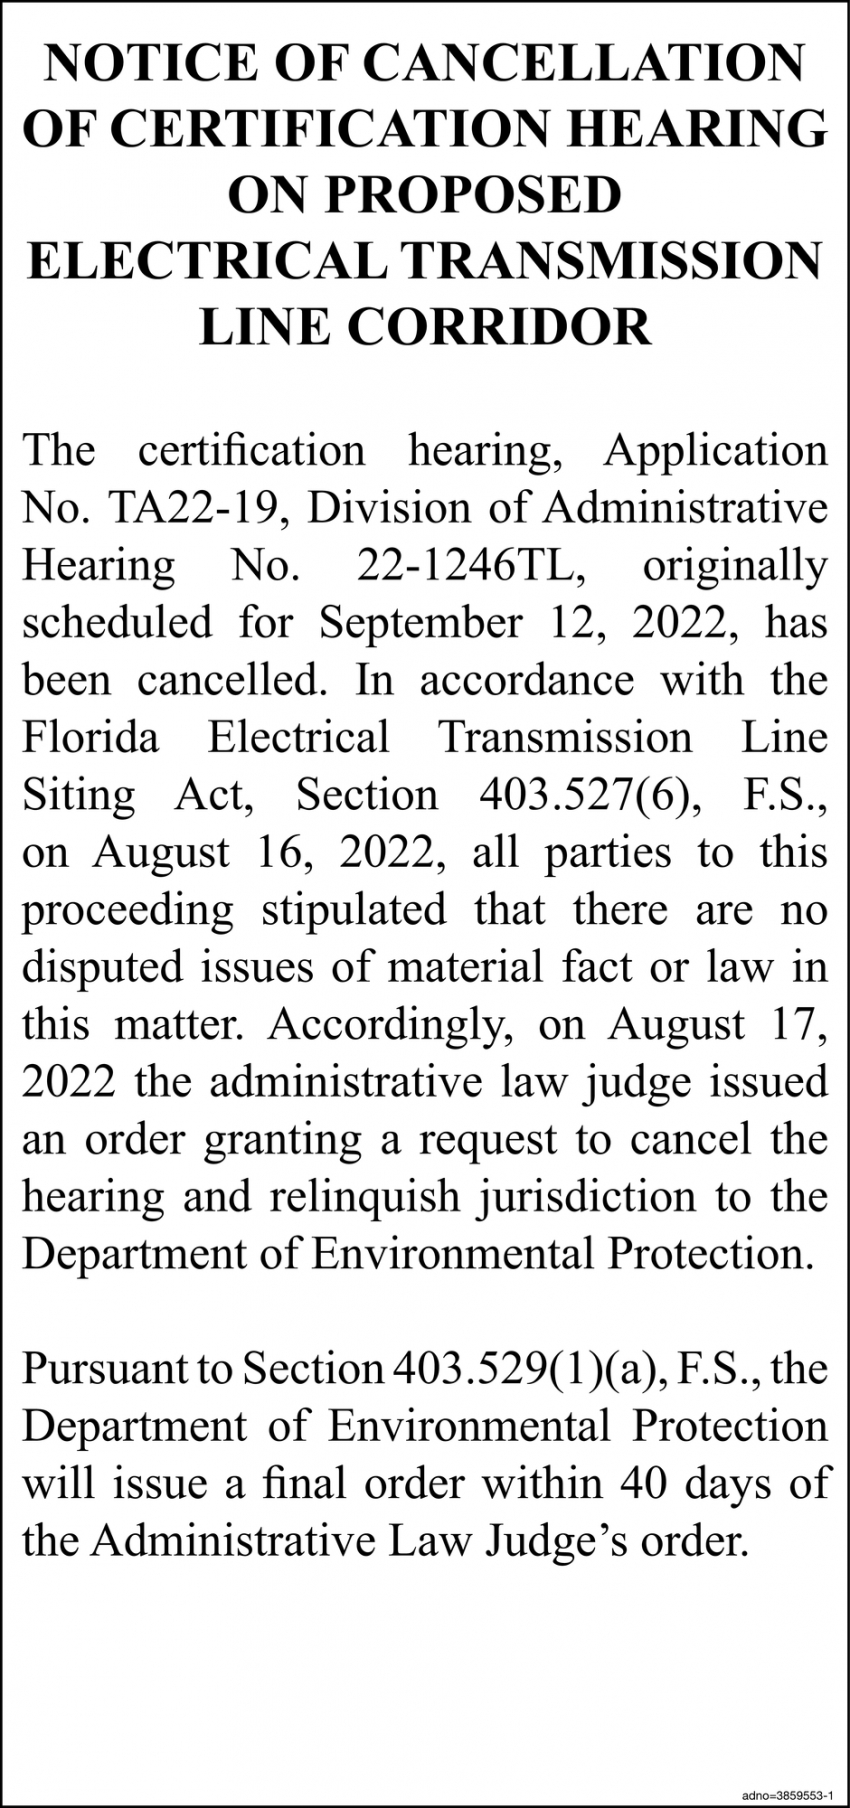 Notice of Cancellation of Certification Hearing on Proposed Electrical Transmission Line Corridor